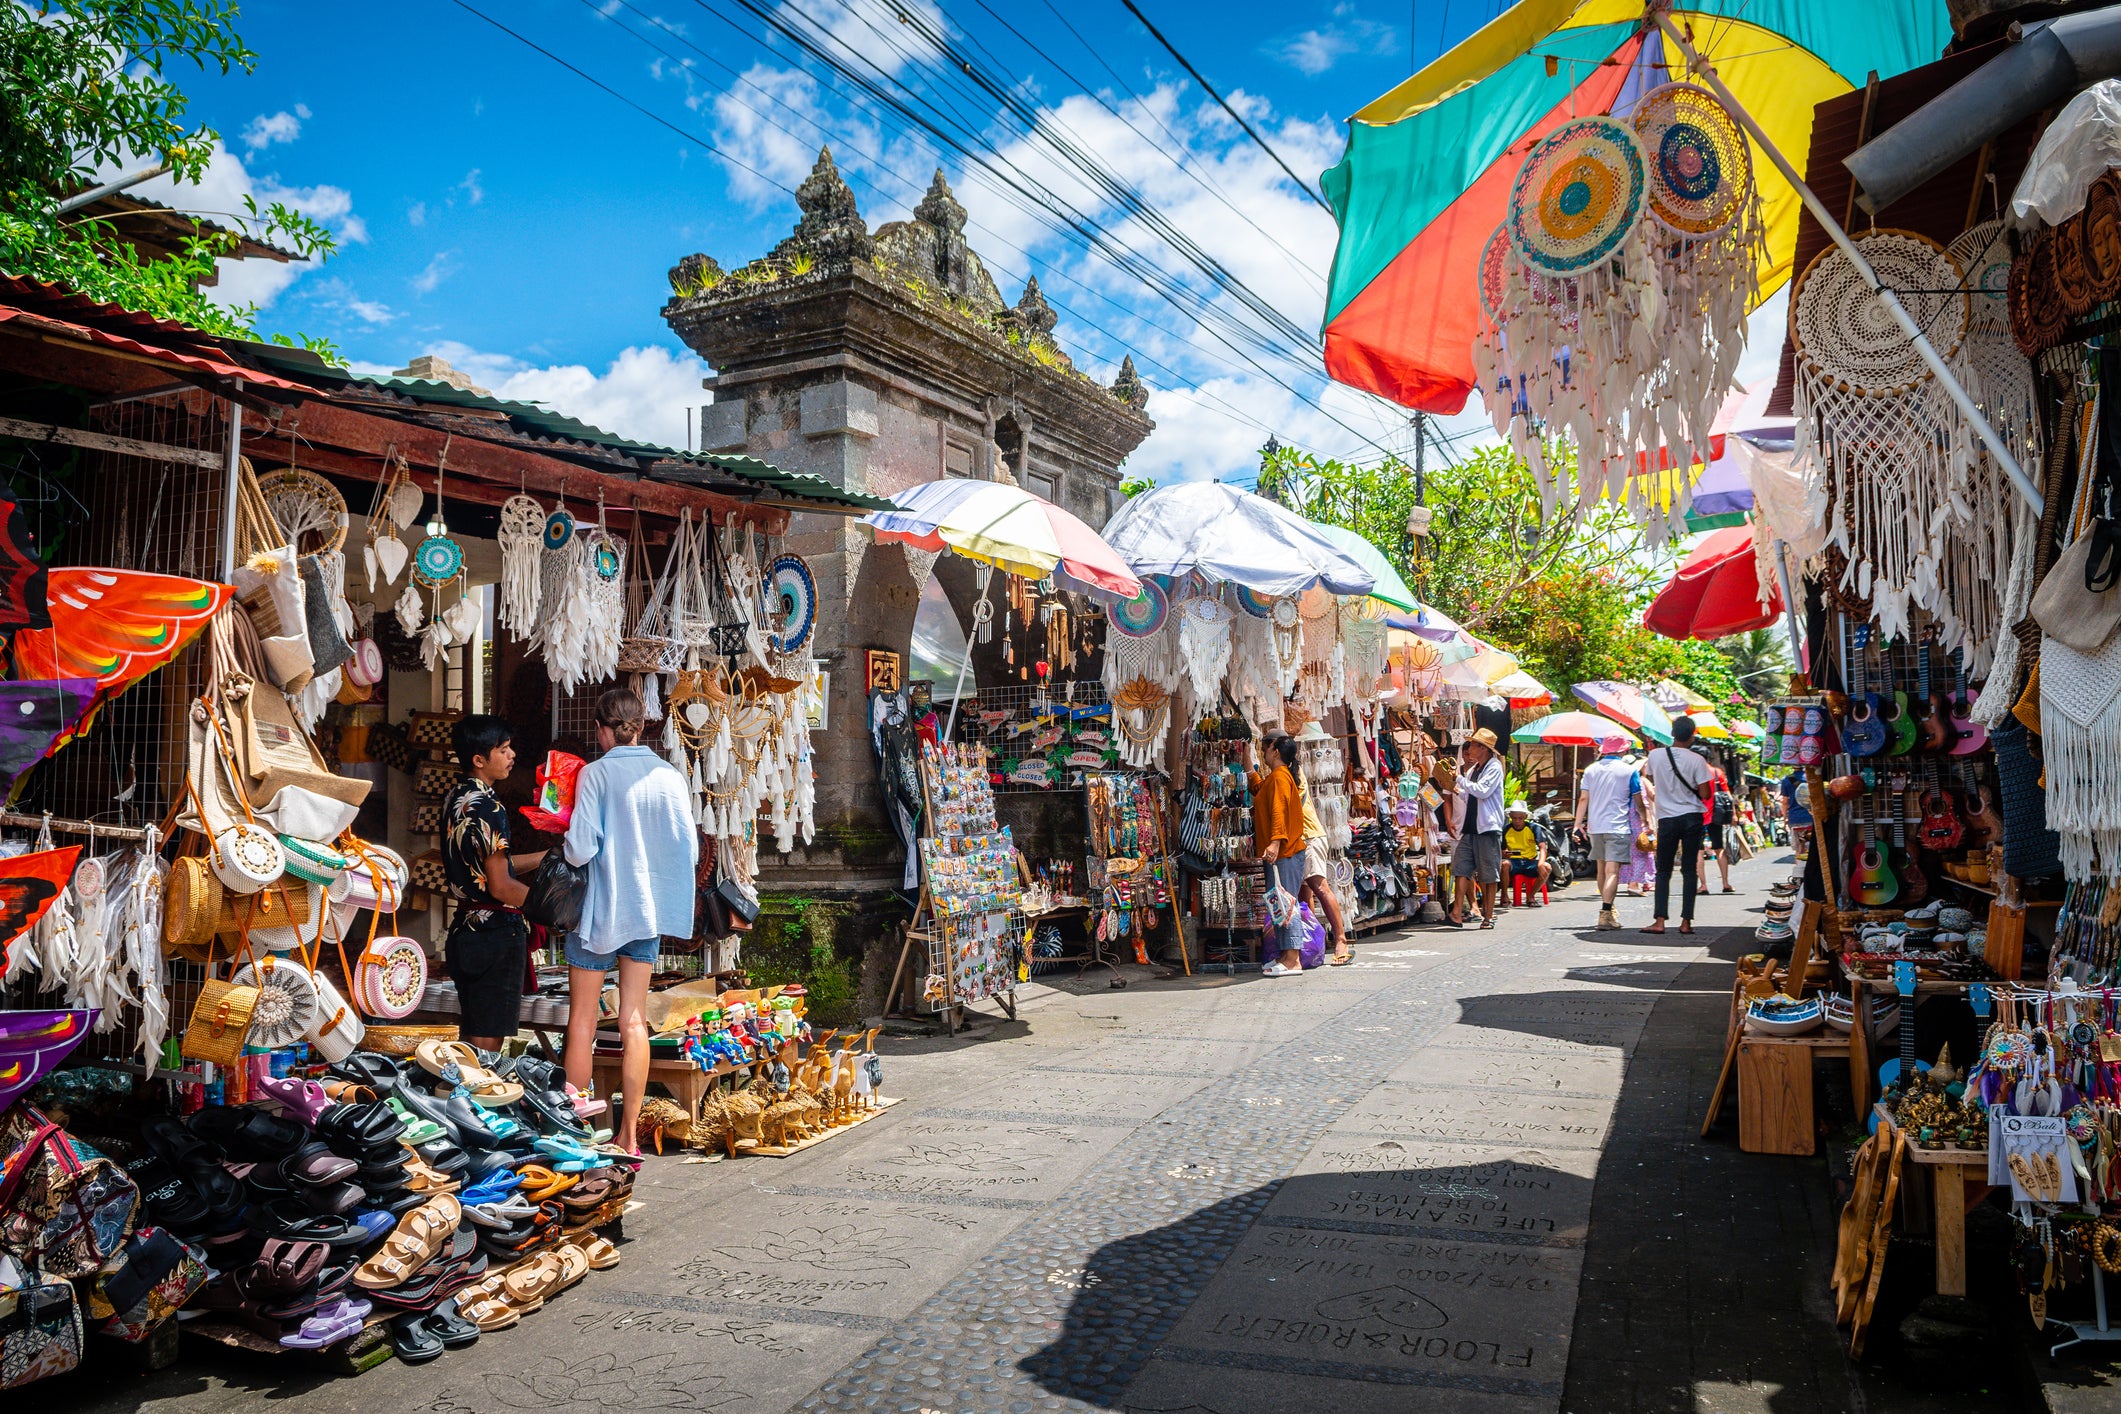 Find something to take home in Ubud’s markets